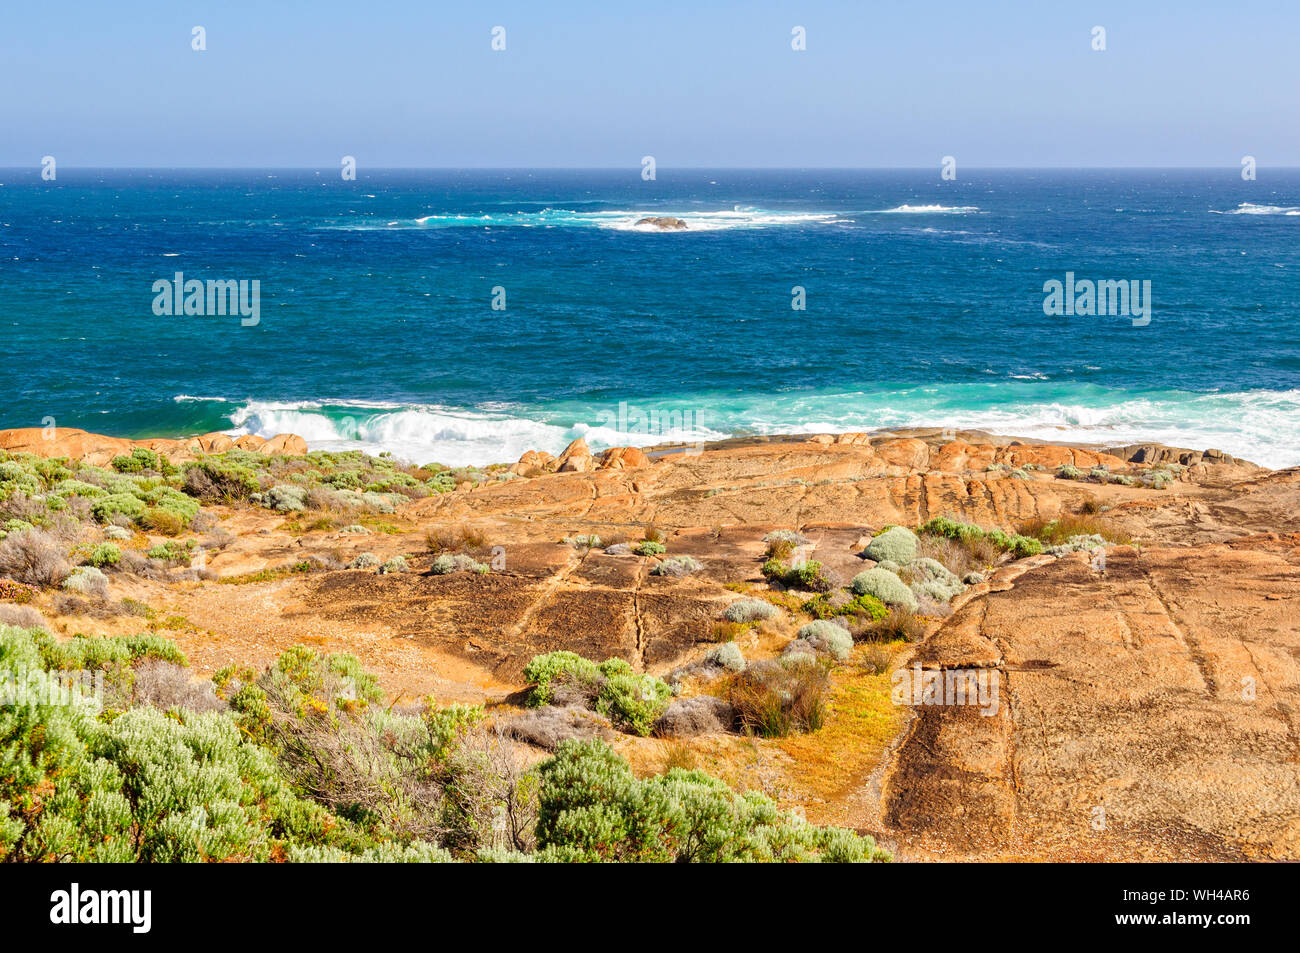 The powerful Indian and Southern Oceans converge at the historic Cape Leeuwin Lighthouse - Augusta, WA, Australia Stock Photo